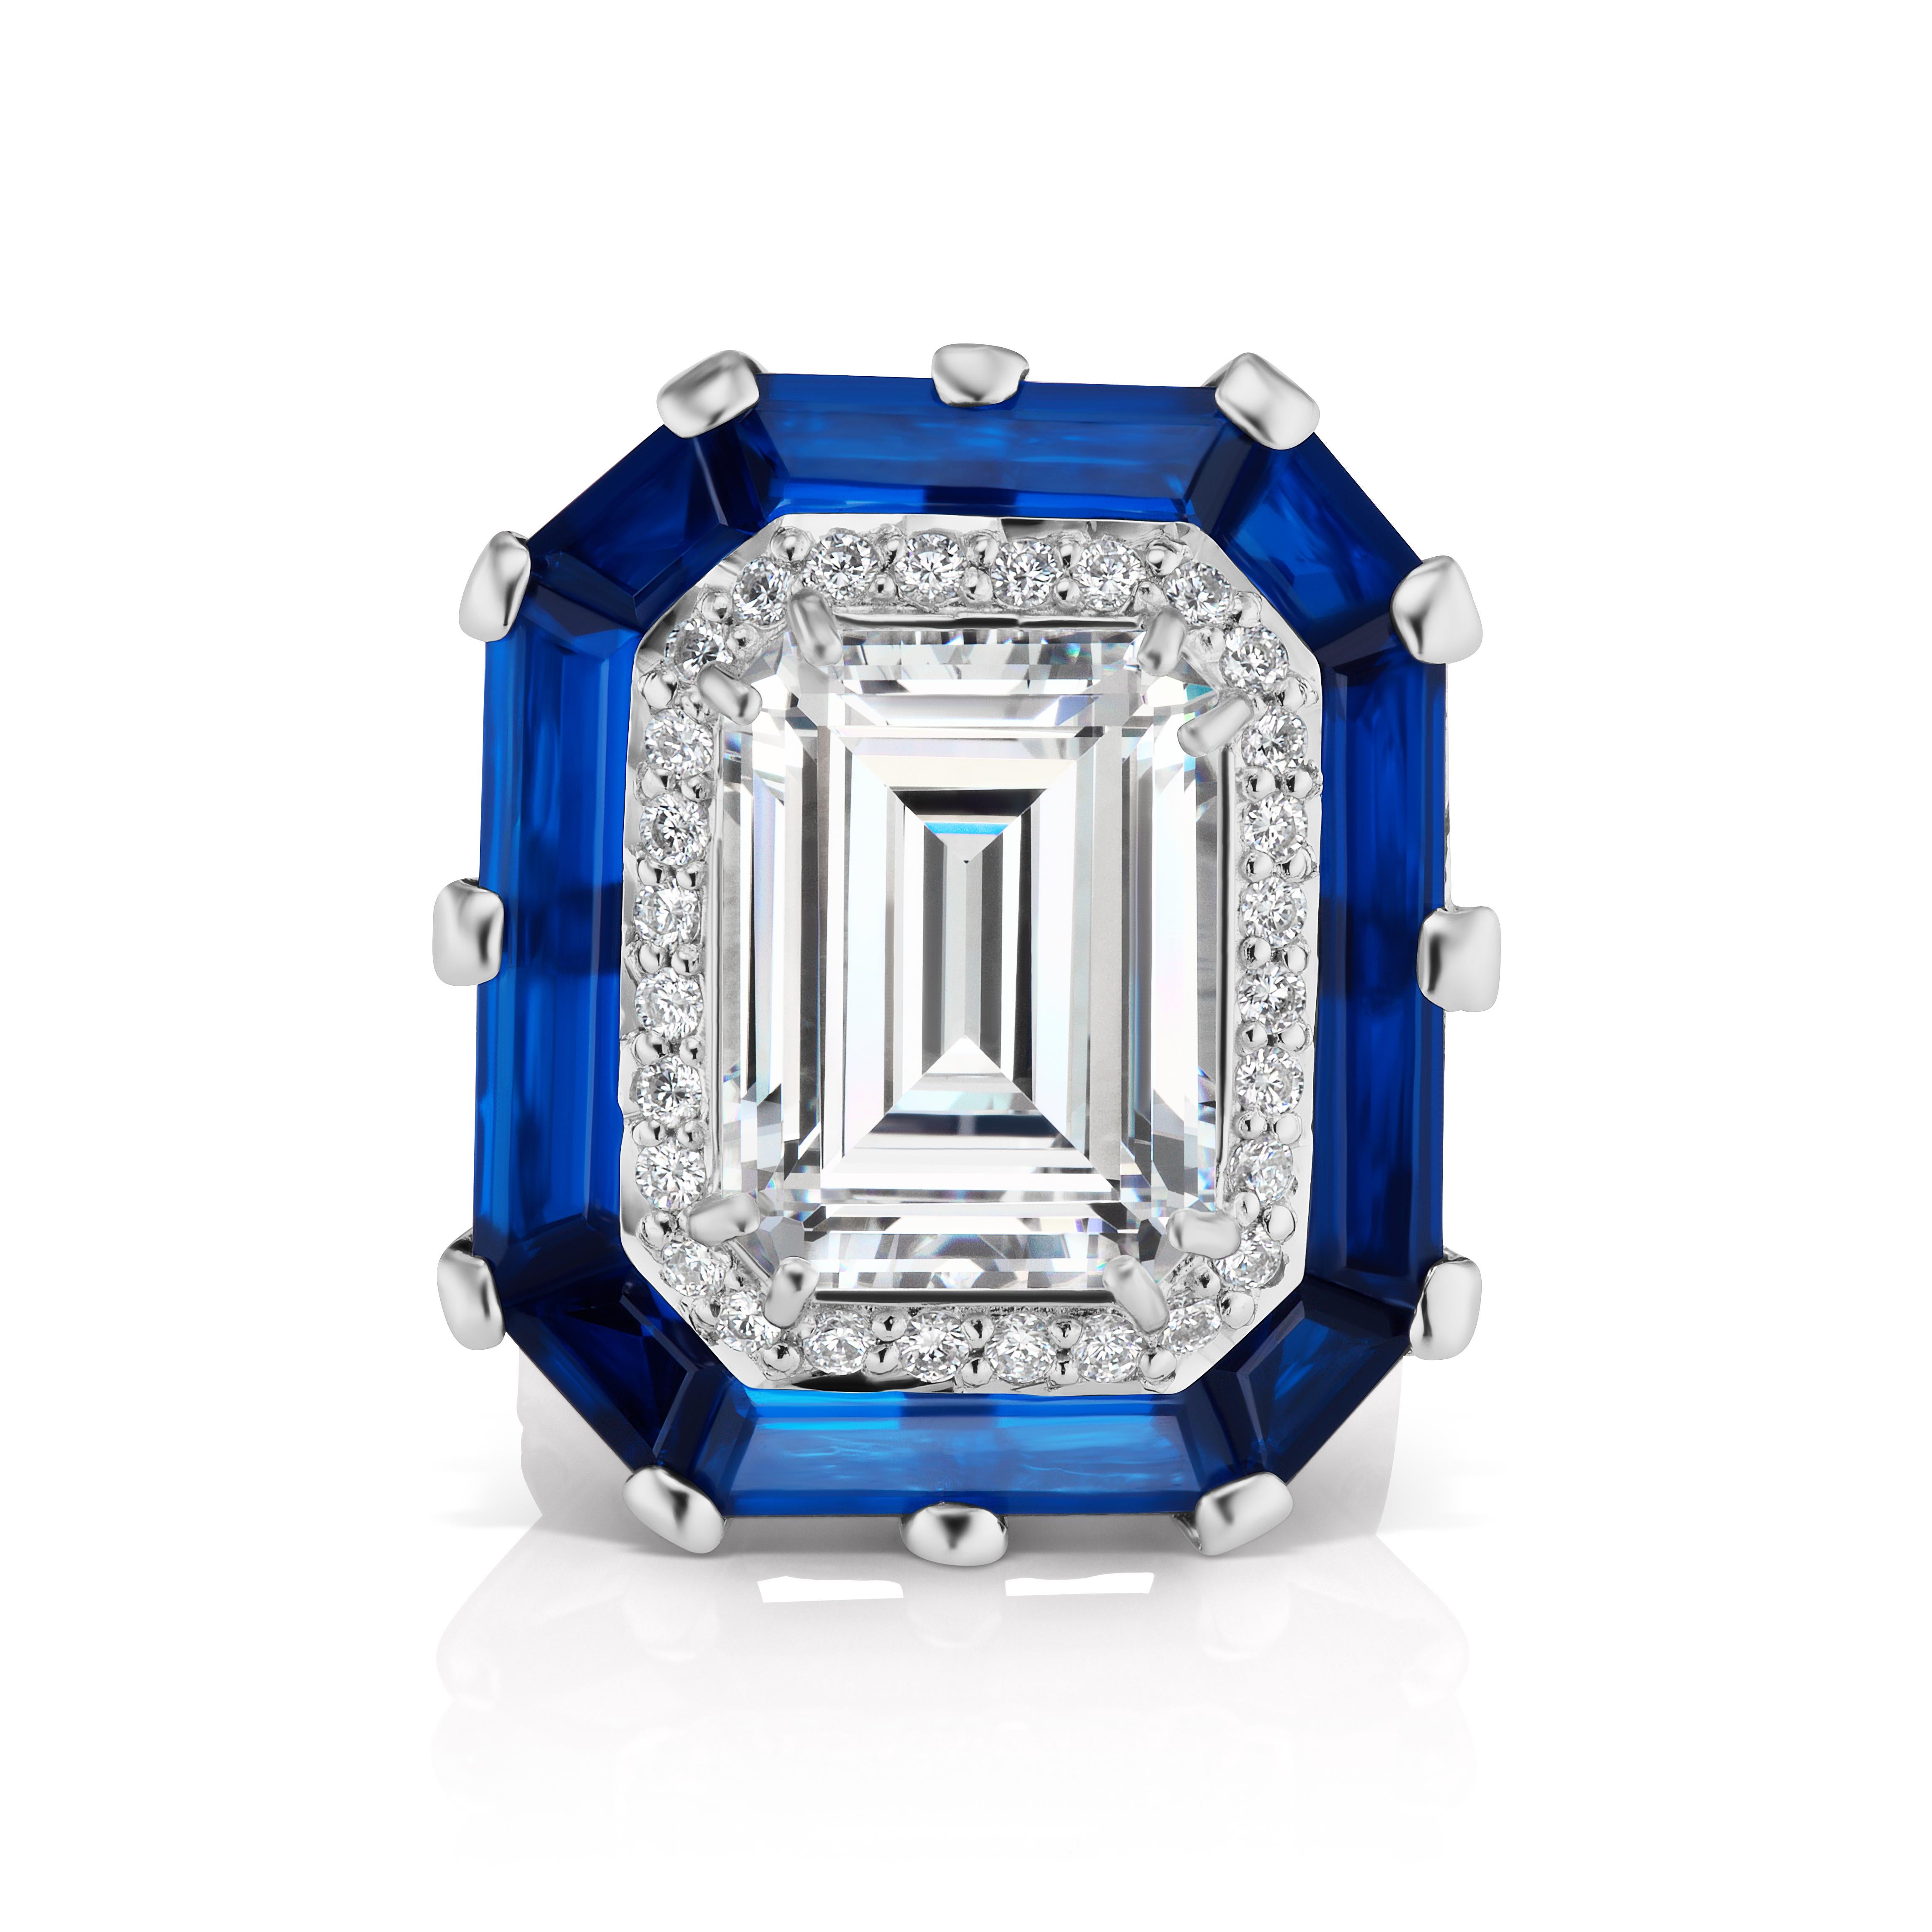 Magnificent Costume Jewelry Art Deco Style Halo Cubic Zirconia 12 Carat Emerald Cut  Diamond Man-Made Sapphire Baguette with Round CZs Set All Around the Shank Sterling Ring. 1 Inch long by 1 Inch wide. Free sizing